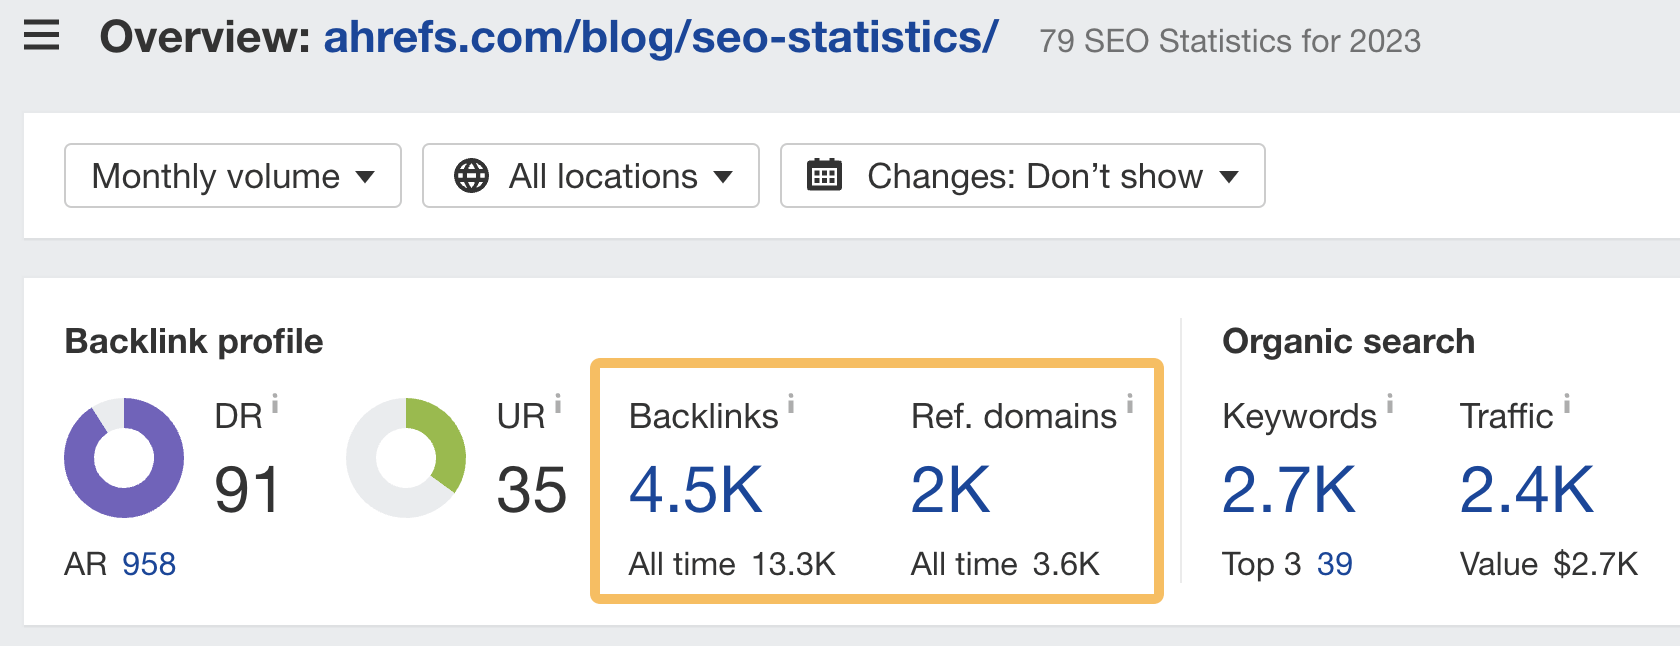 No. of backlinks and referring domains for Ahrefs' SEO stats page, via Ahrefs' Site Explorer